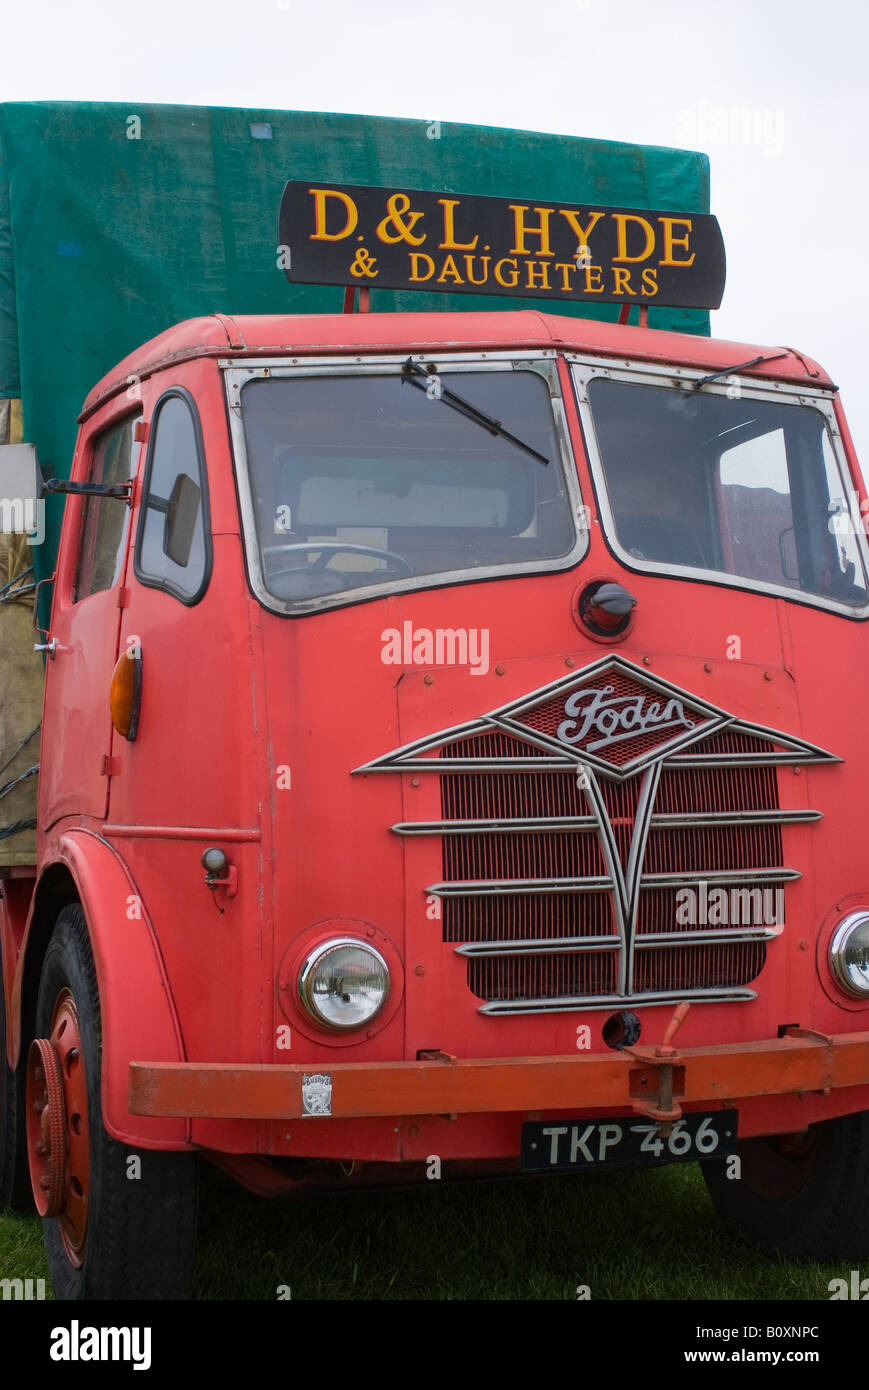 Old 1959 Foden 8 Wheel Flat Truck at Smallwood vintage Rally Cheshire England United Kingdom UK Stock Photo